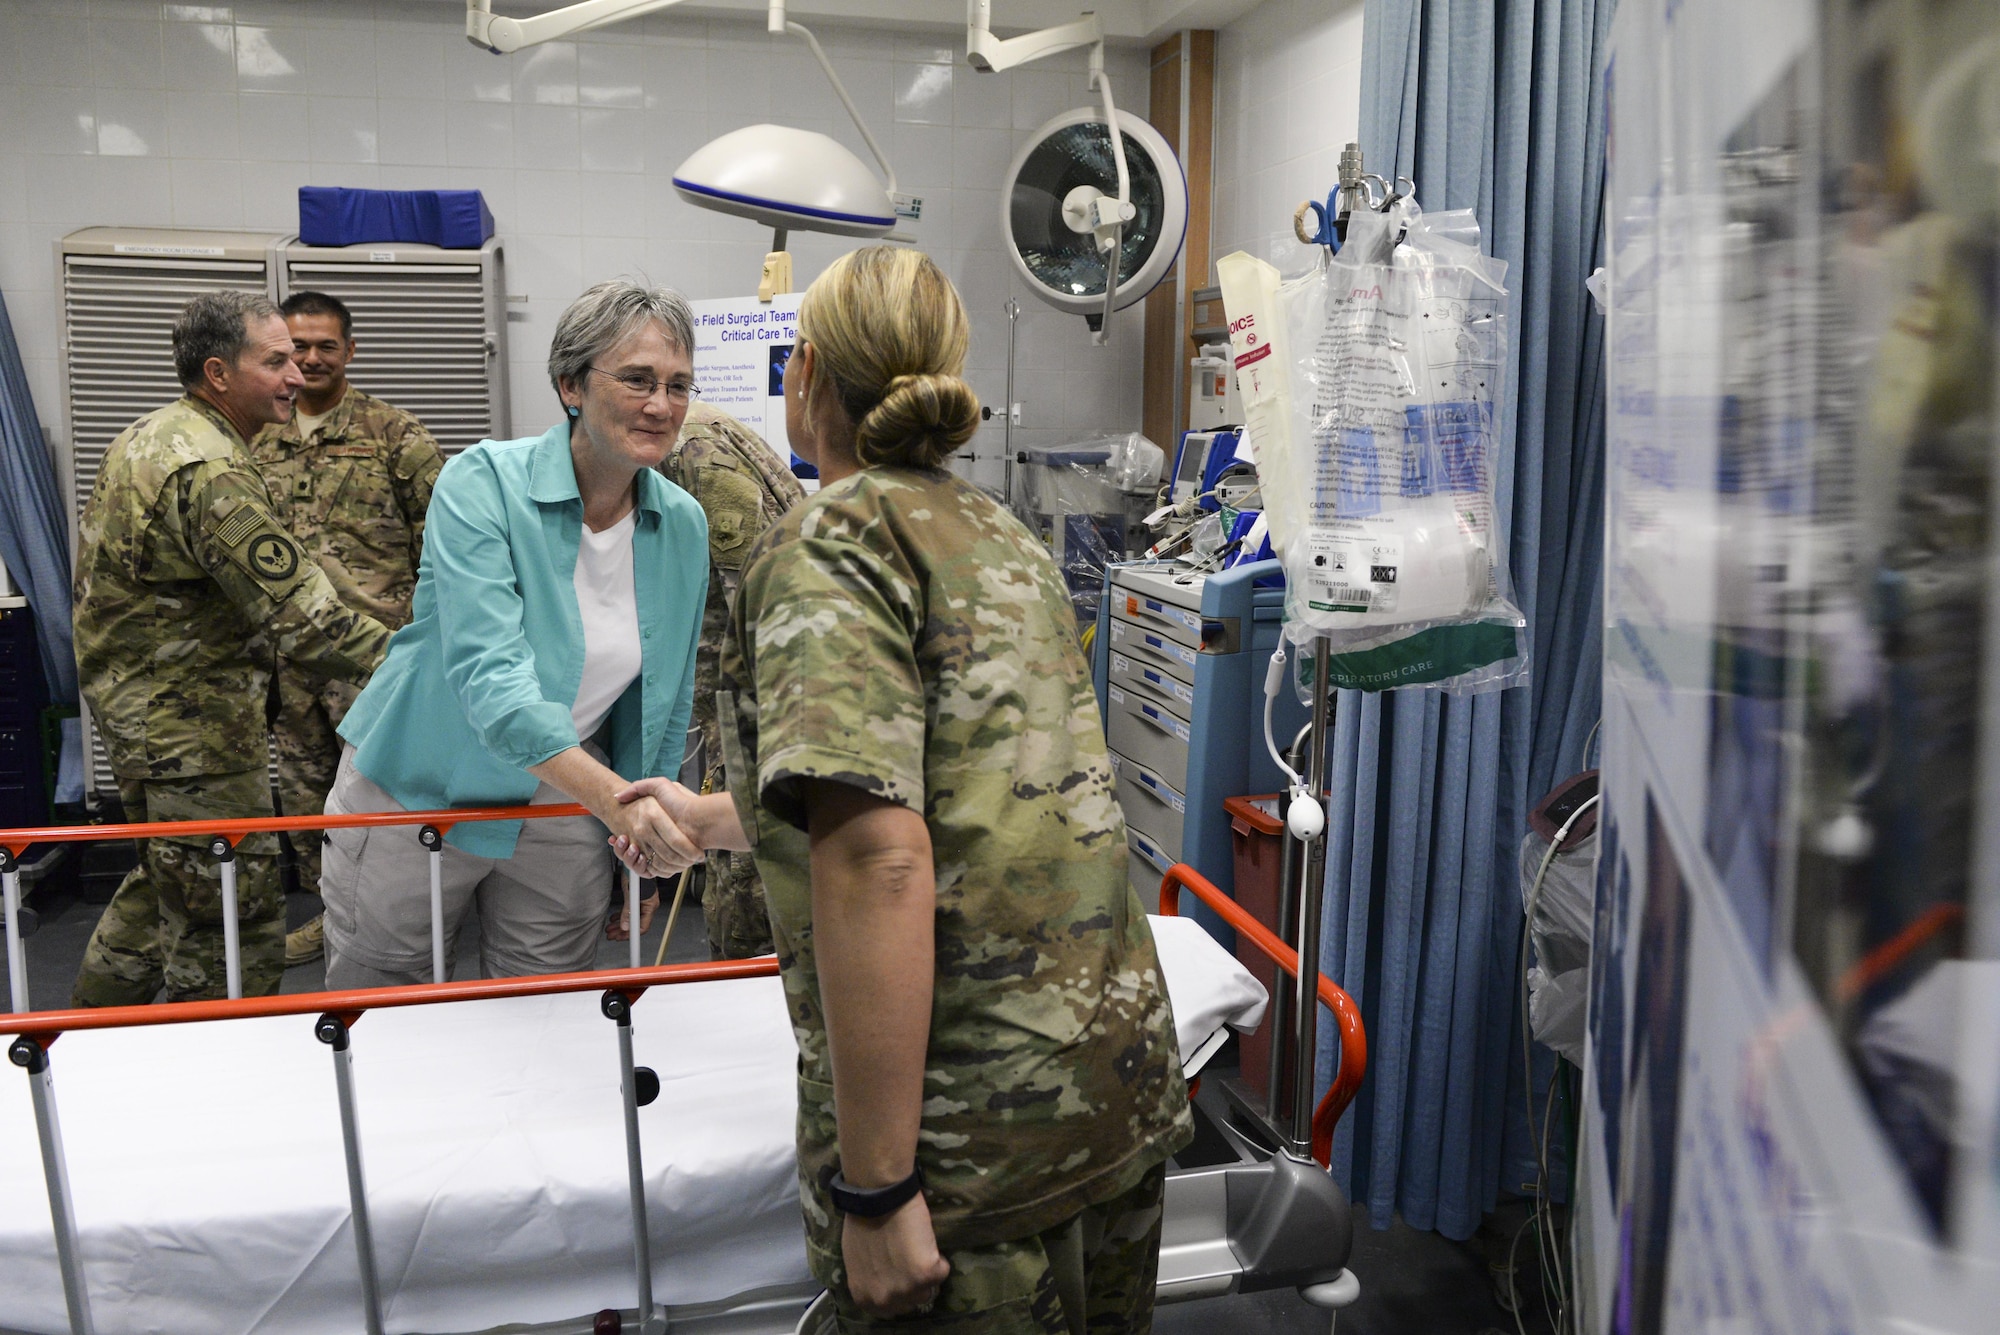 Secretary of the Air Force Heather Wilson shakes hands with U.S. Air Force Tech. Sgt. Ashley Hall, dental assistant assigned to the 379th Expeditionary Medical Group, at Al Udeid Air Base, Qatar, Aug. 15, 2017. During the visit Wilson and Air Force Chief of Staff Gen. David L. Goldfein spent time with Airmen, learning about their contributions to U.S. Air Forces Central Command. (U.S. Air Force photo by Tech. Sgt. Bradly A. Schneider)